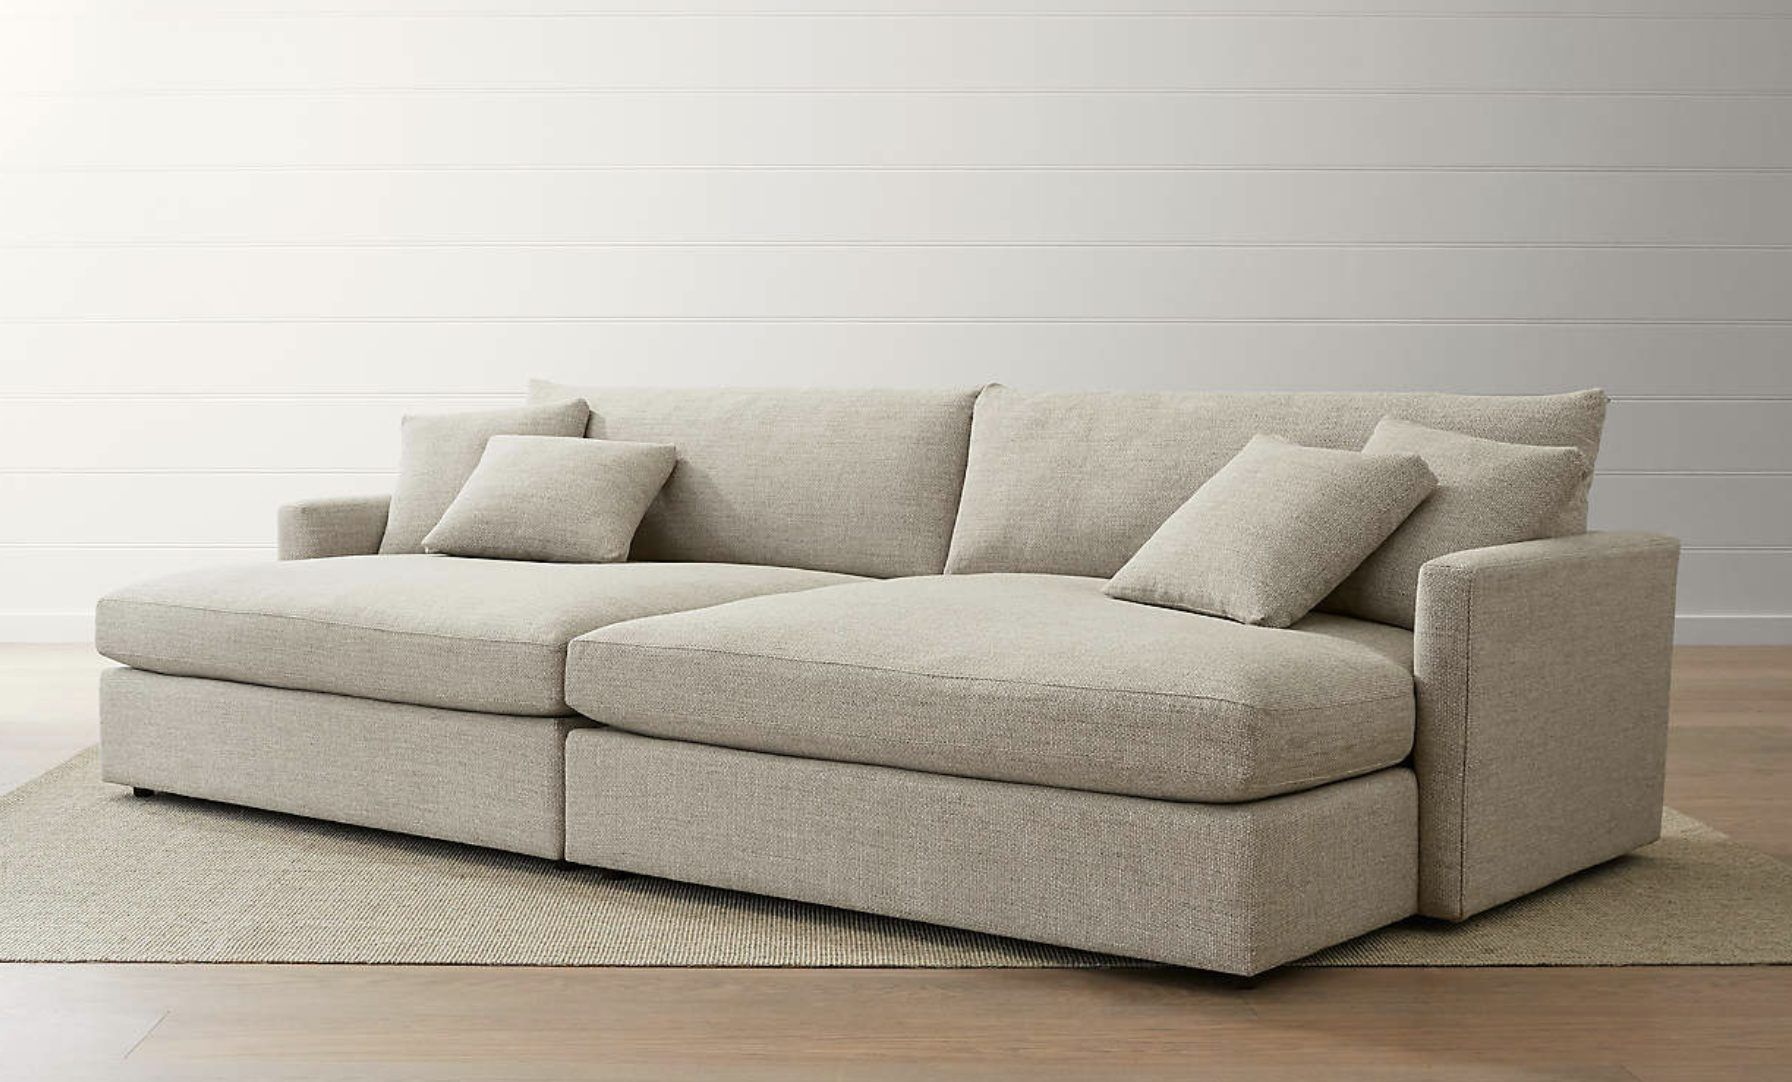 Large Overstuffed Sectional Sofas | Baci Living Room Inside 110" Oversized Sofas (View 5 of 20)